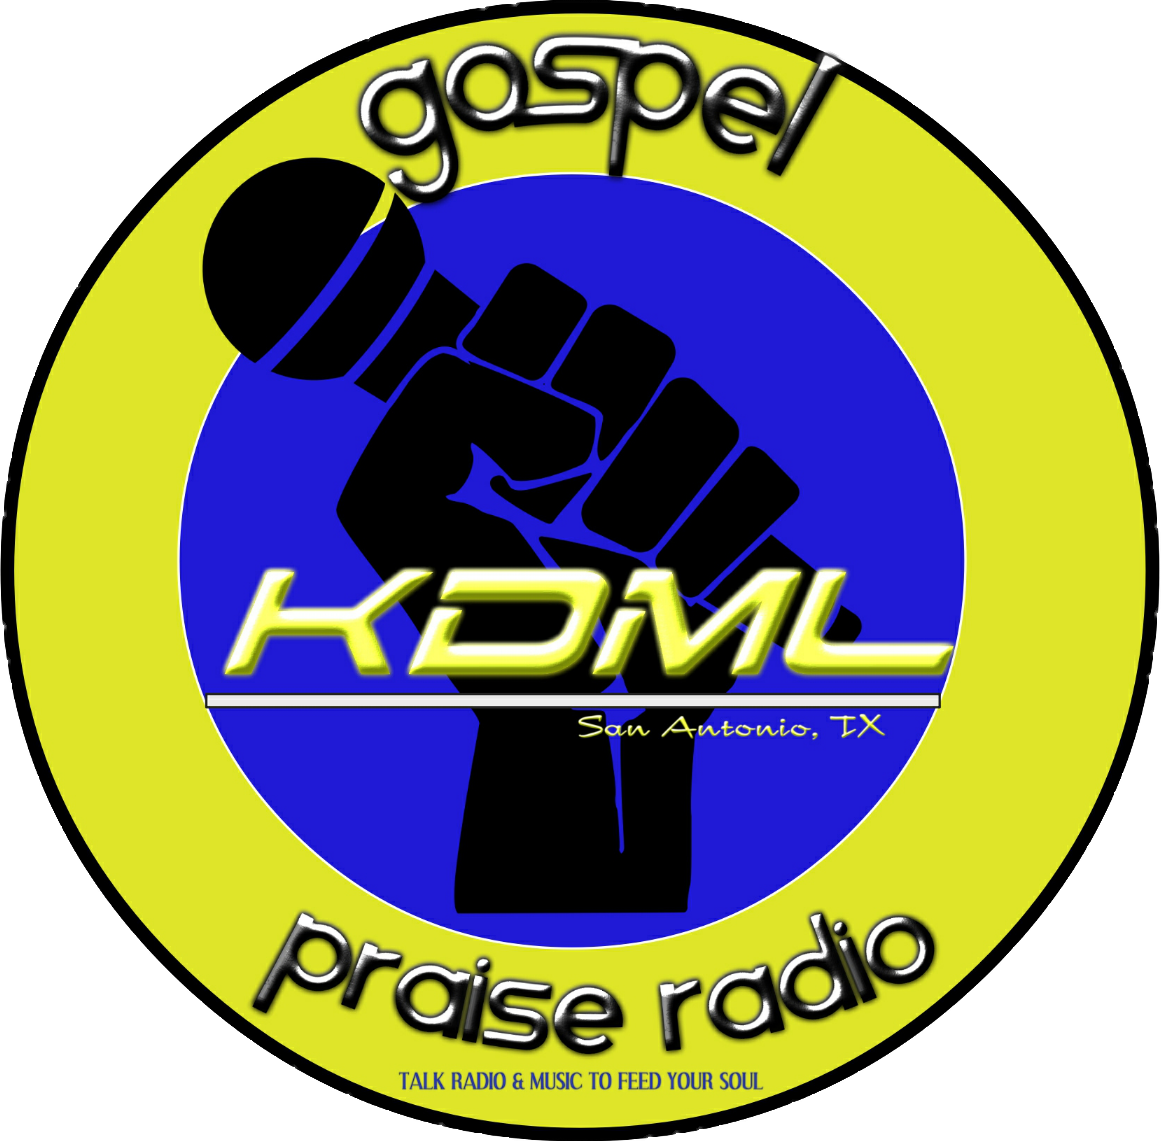 Art for KDML Radio promo by Promo